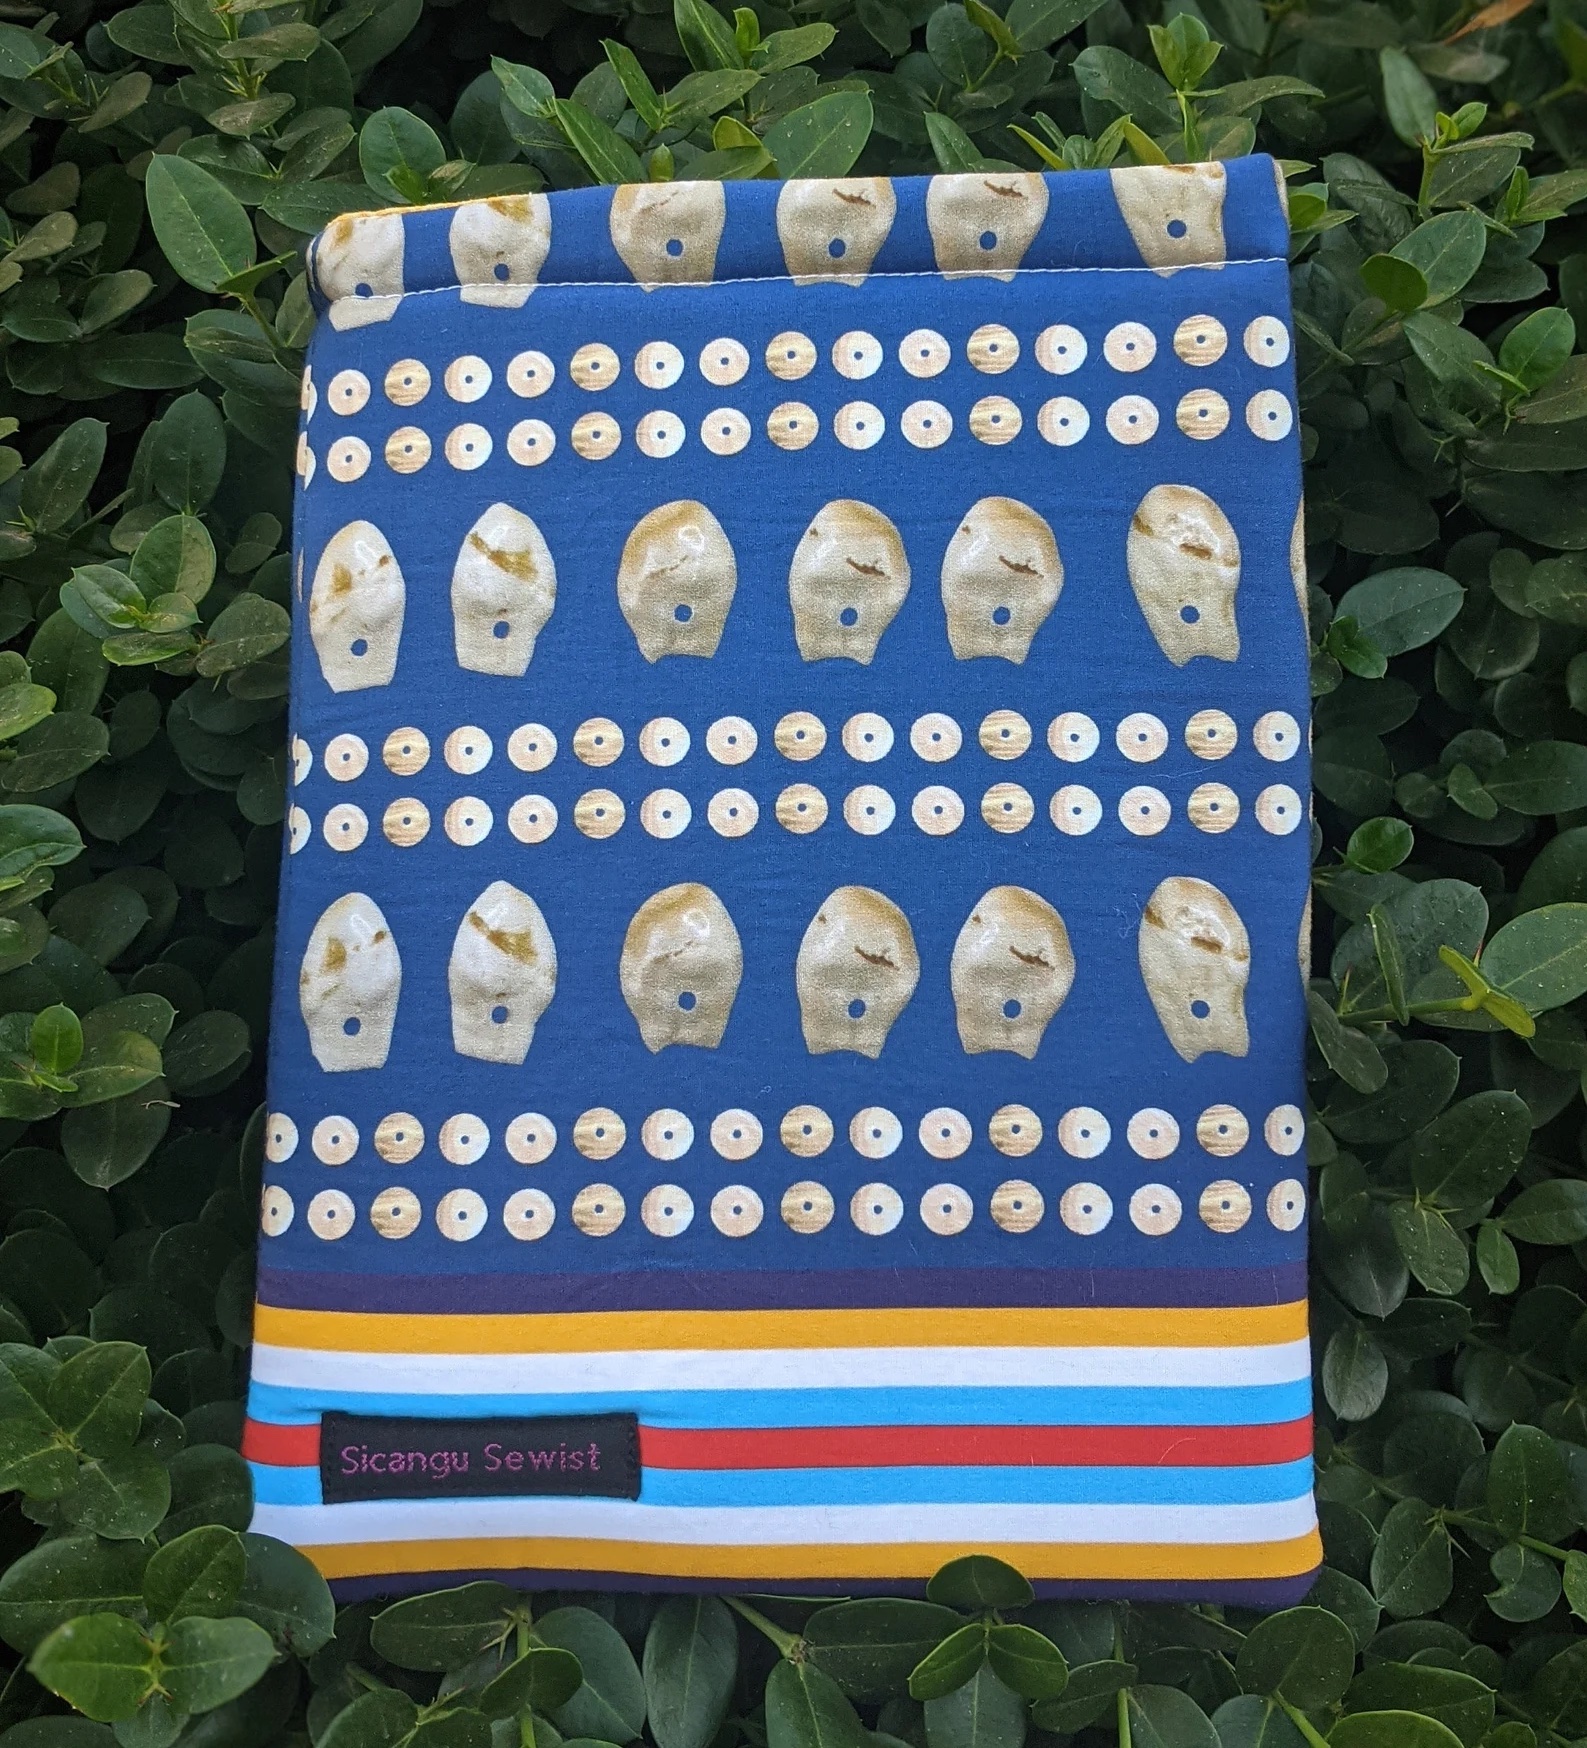 A photo of a blue book sleeve features animal teeth